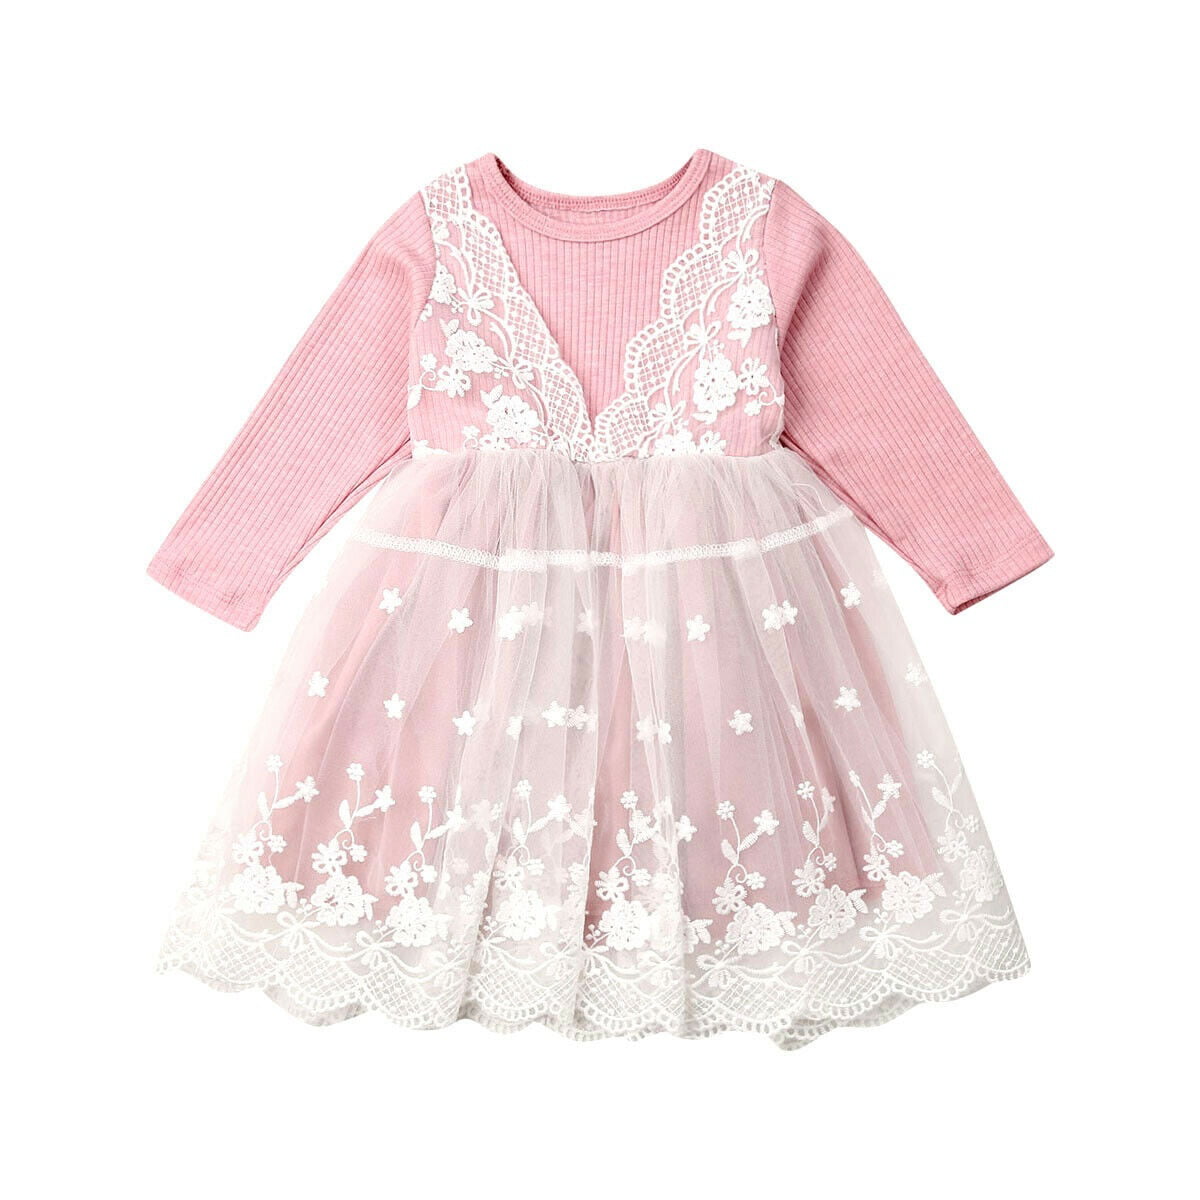 Toddler Baby Girl Floral Long Sleeve Tulle Tutu Princess Dress Outfits Clothes